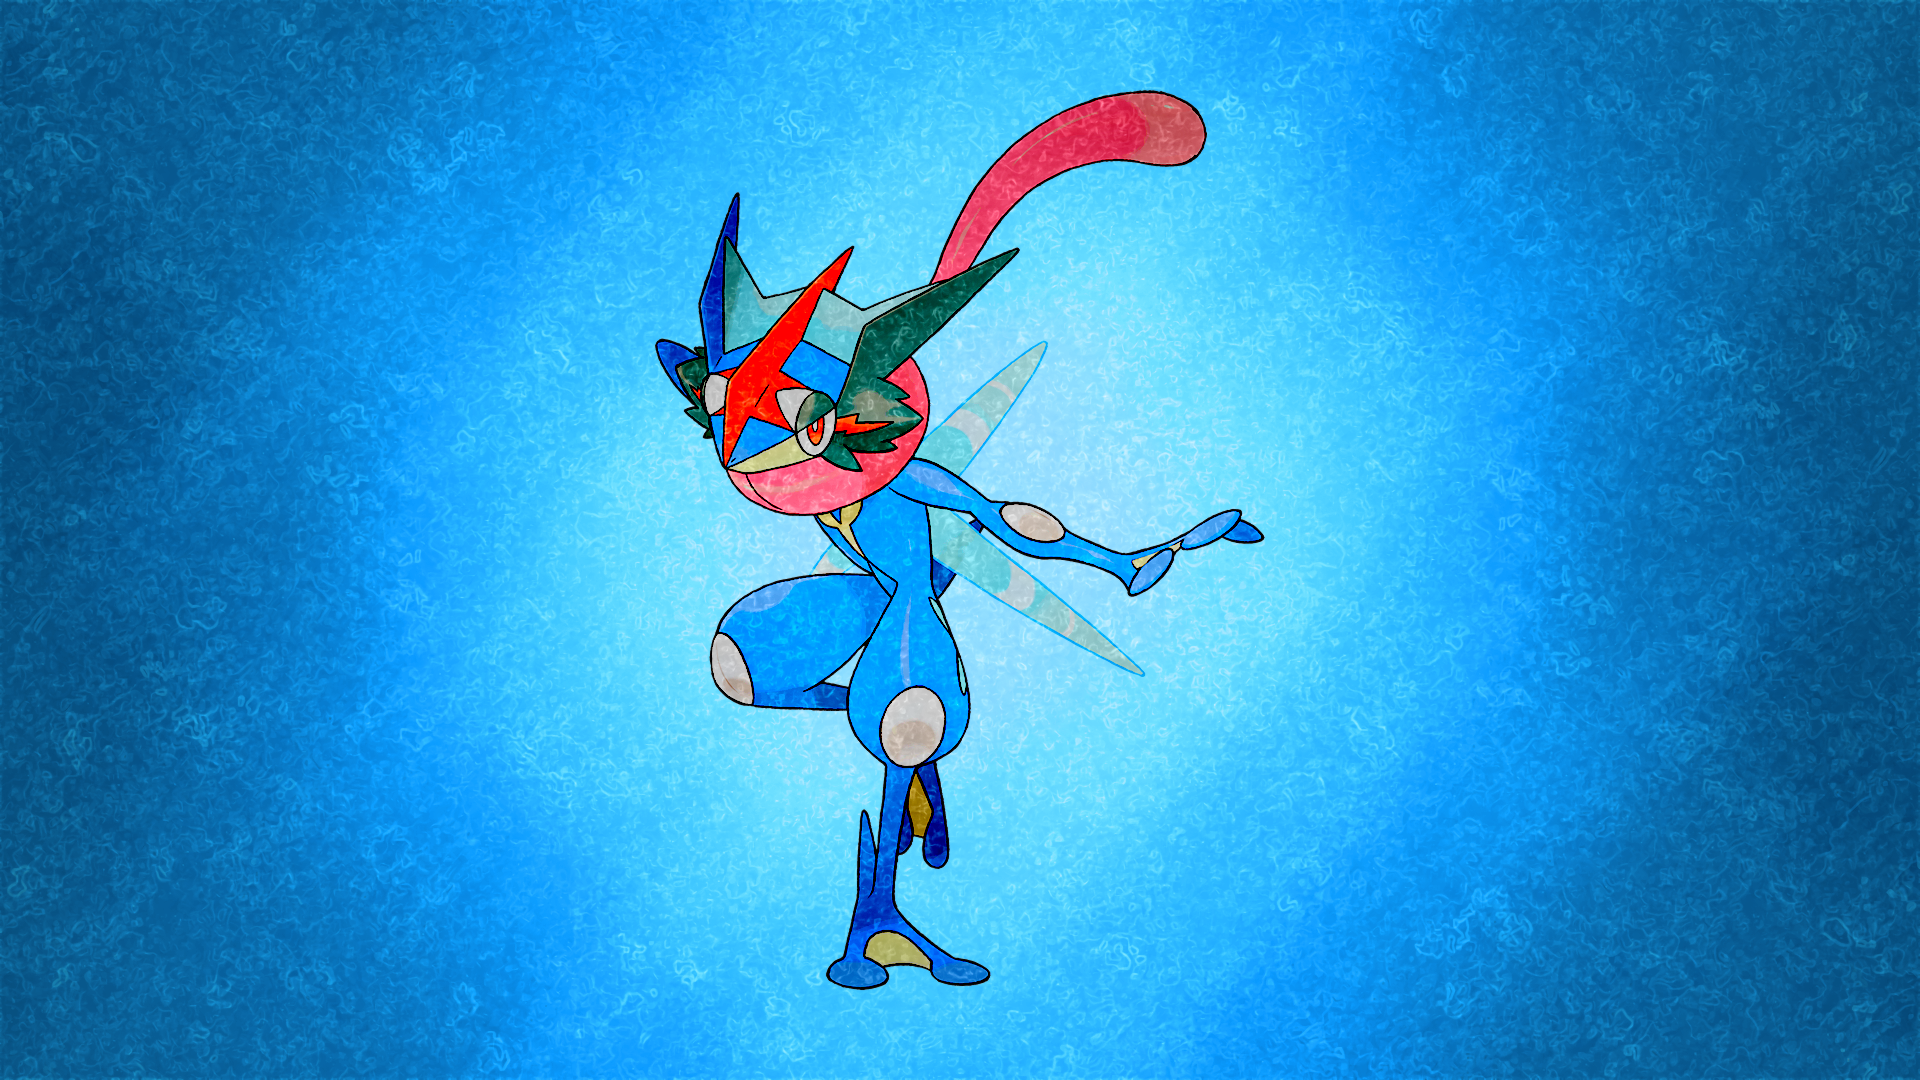 Ash Wallpapers For Android For Wallpaper Idea - Ash Greninja Wallpaper Hd - HD Wallpaper 